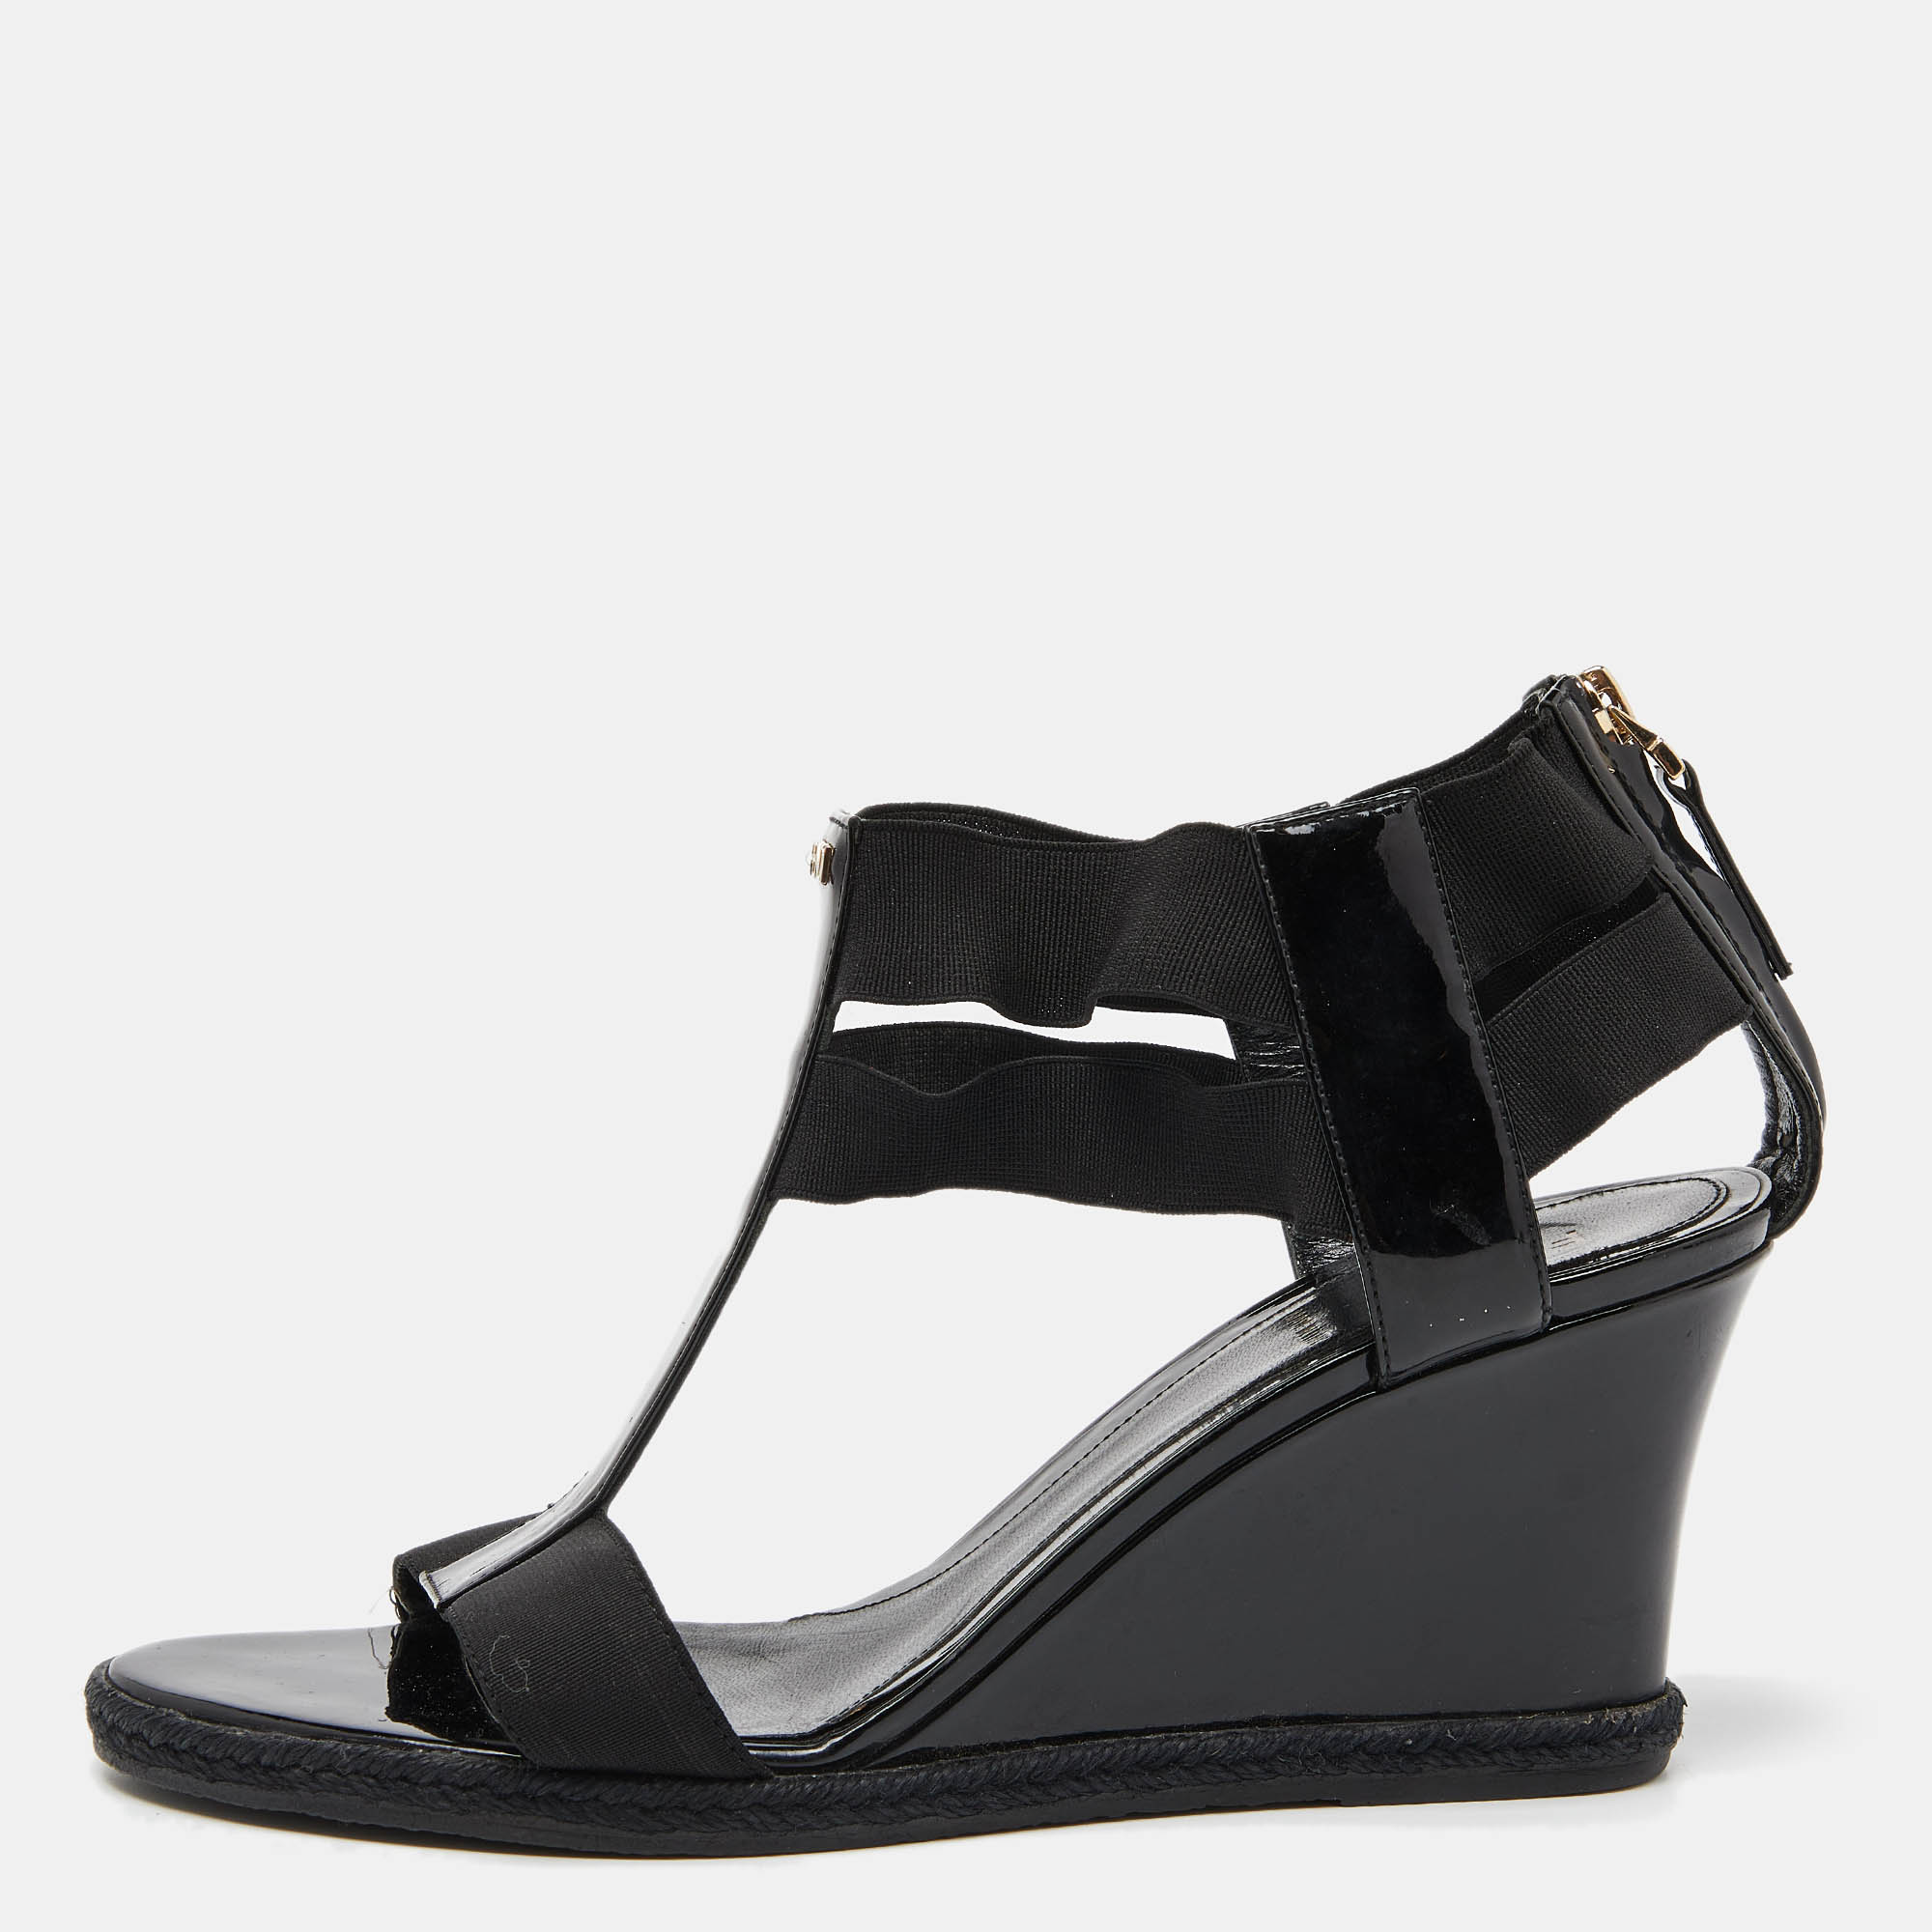 Pre-owned Fendi Black Patent Leather Ankle Strap Wedge Sandals Size 38